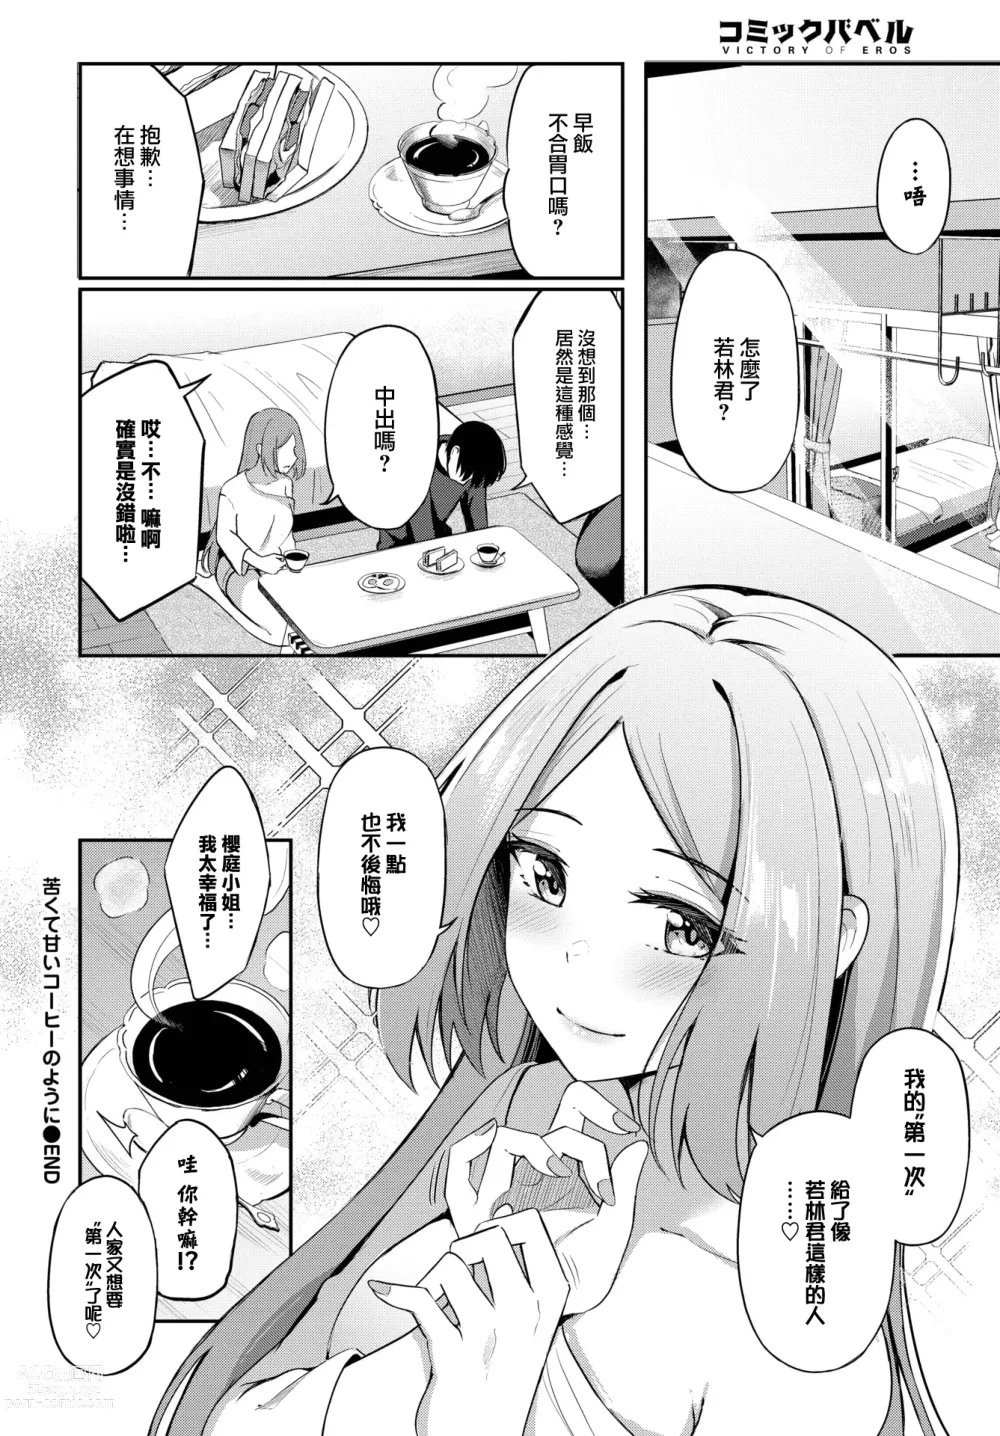 Page 23 of manga Nigakute Amai Coffee no you ni - Its fragrance is very special...